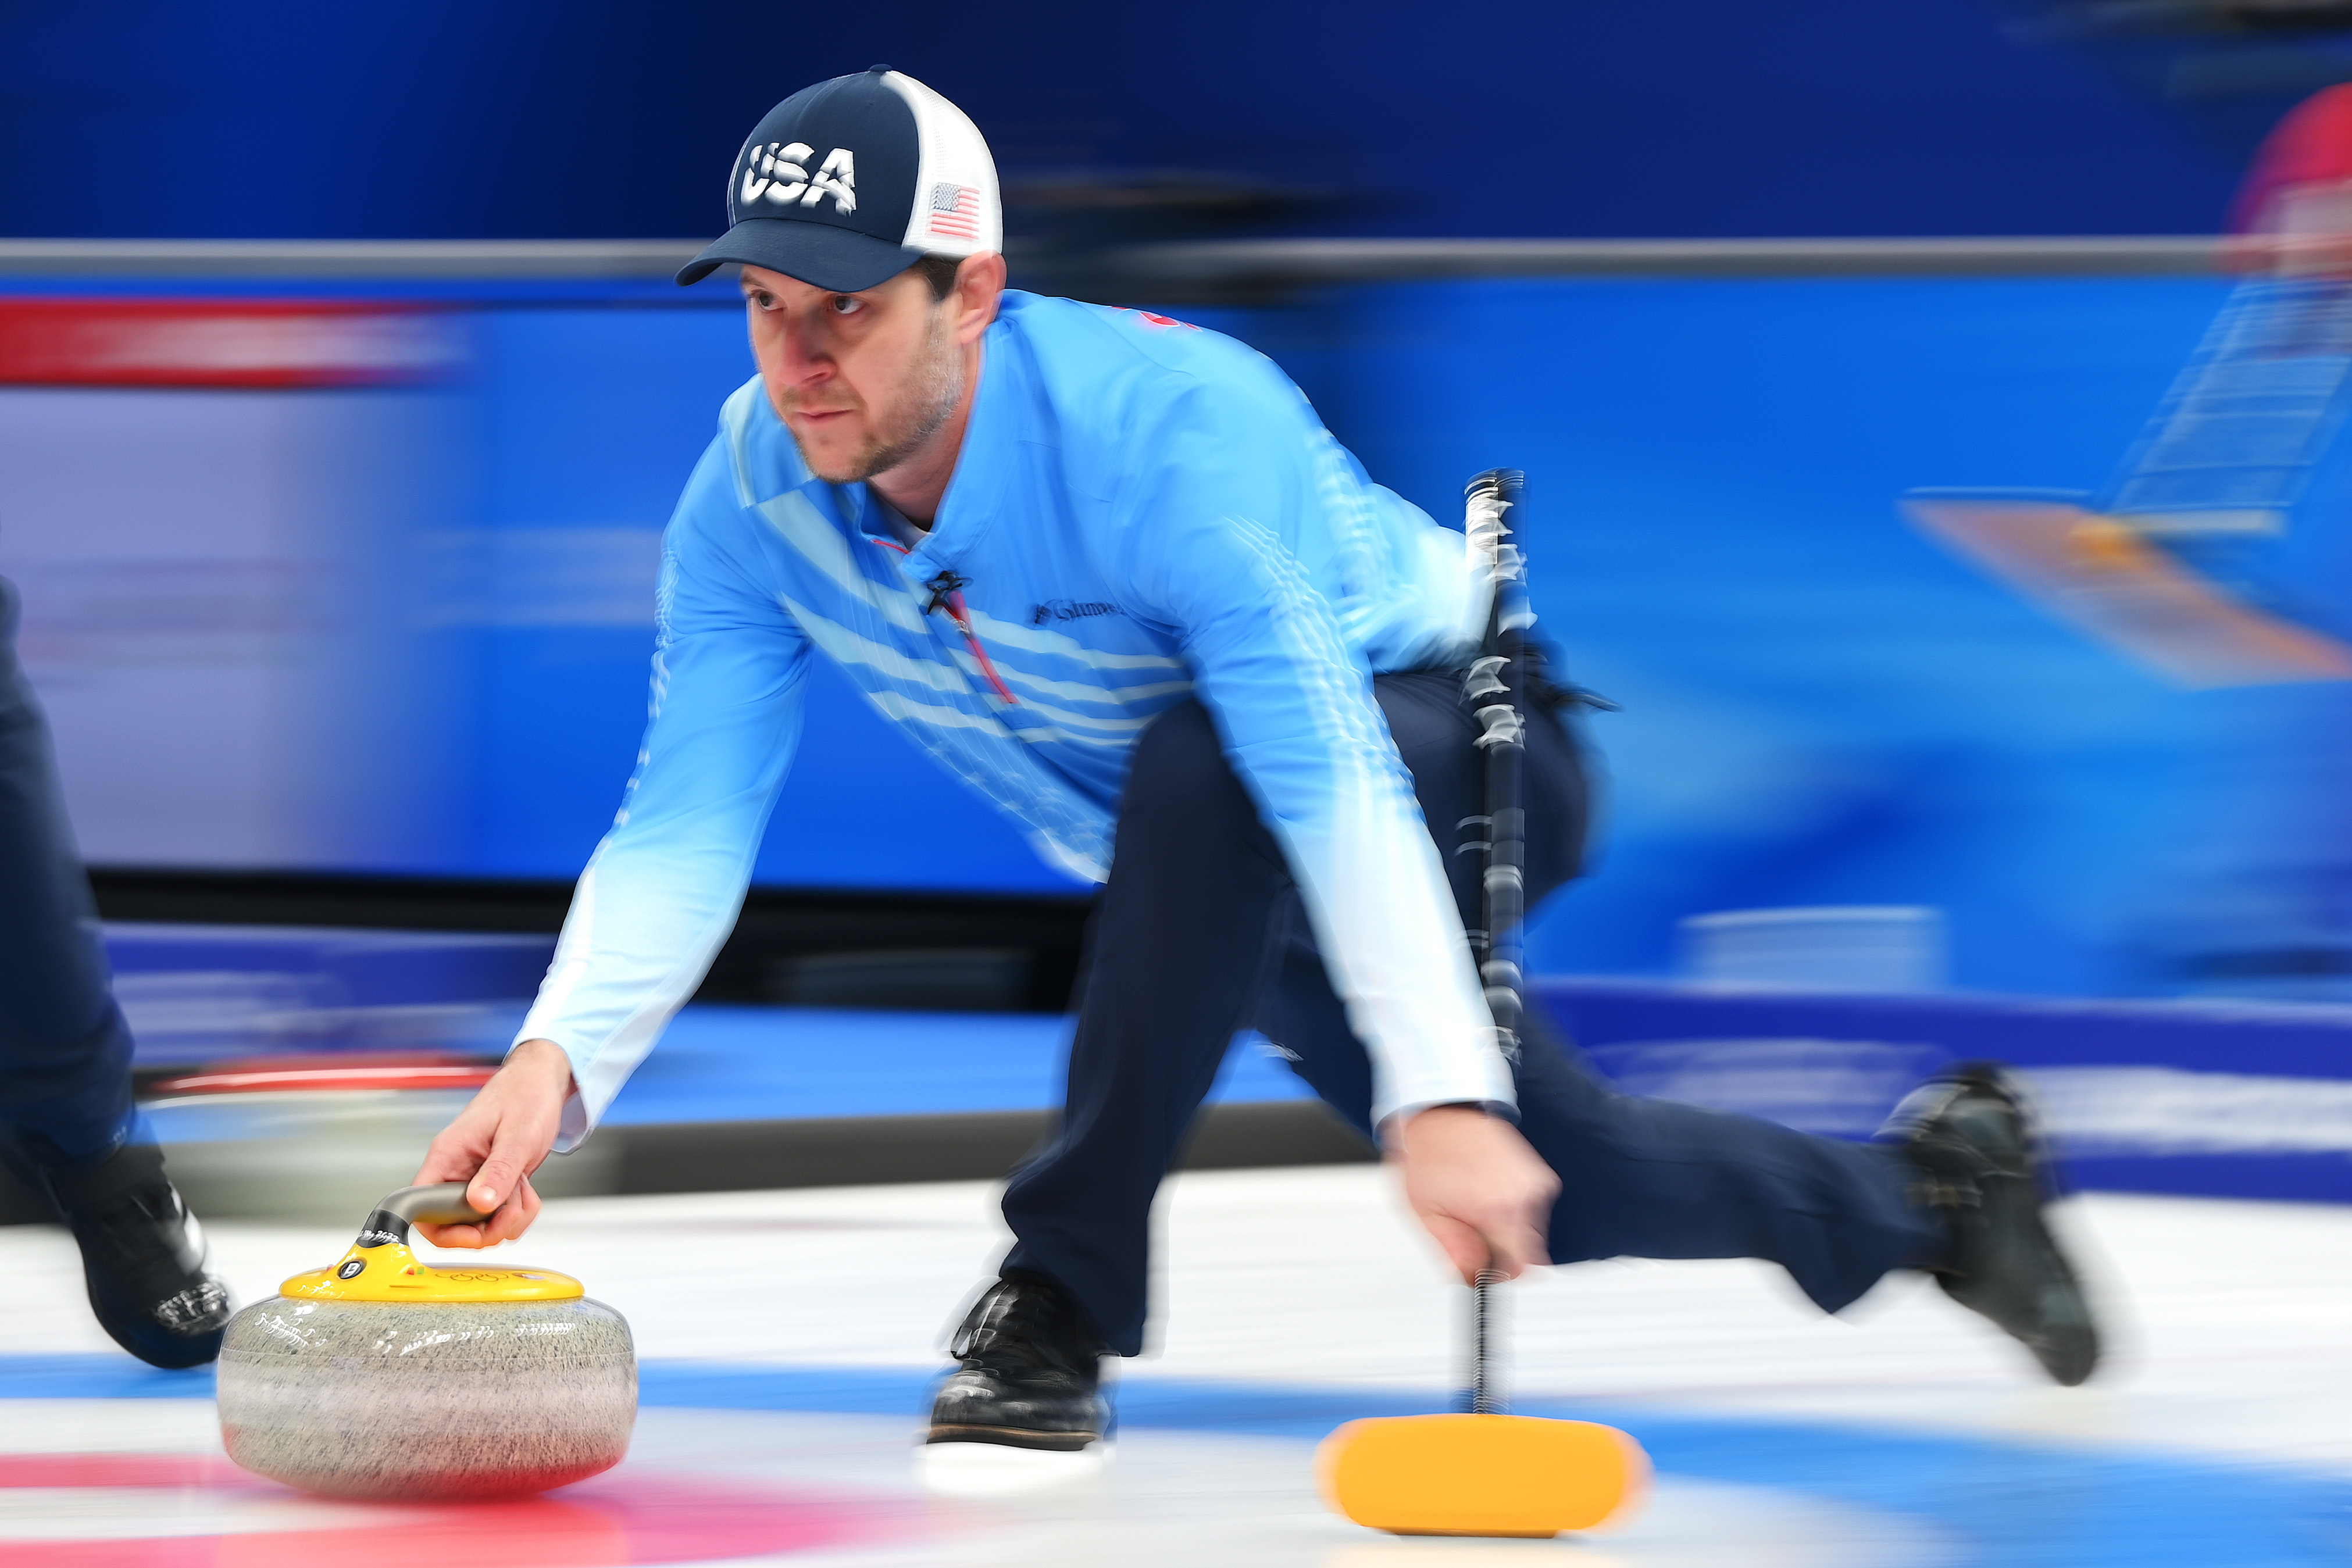 Team USA Curling Defeats China 8-6 in Preliminary Round